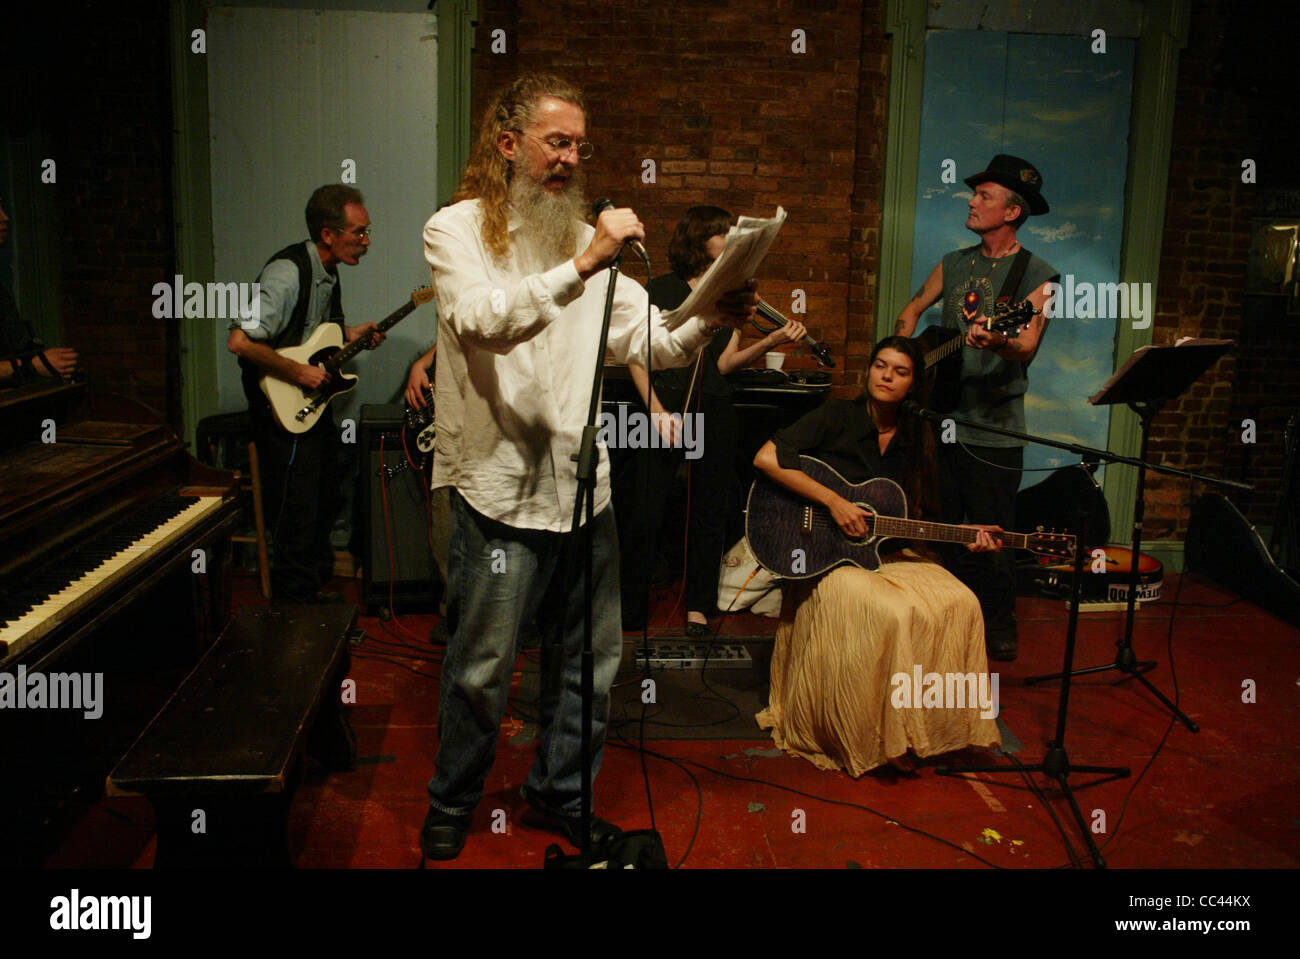 Ron Whitehead, center, performs during the 2003 Insomniacathon Festival at  the Rudyard Kipling club in Louisville, Kentucky in 2 Stock Photo - Alamy